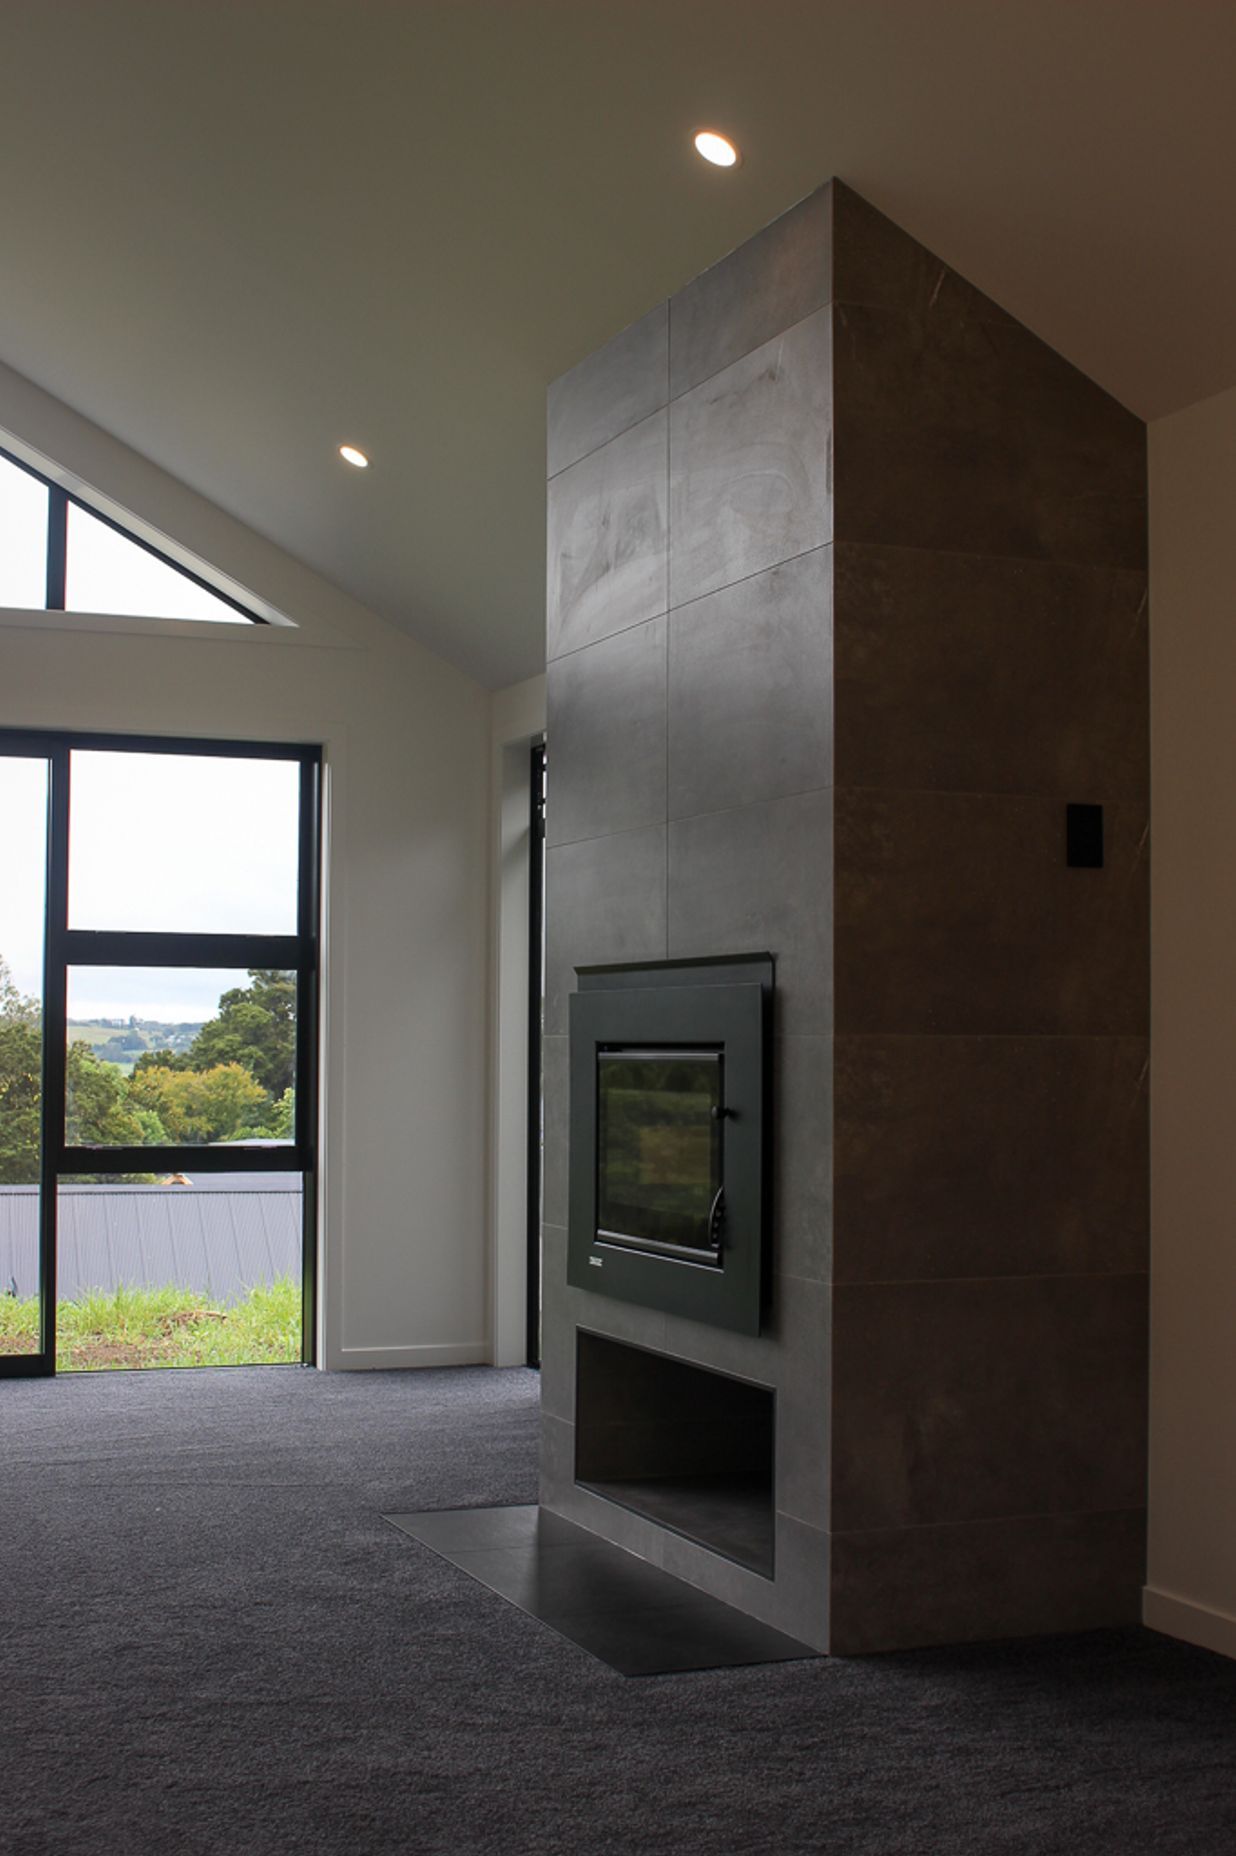 The tiled fireplace features a contemporary tiled firebox